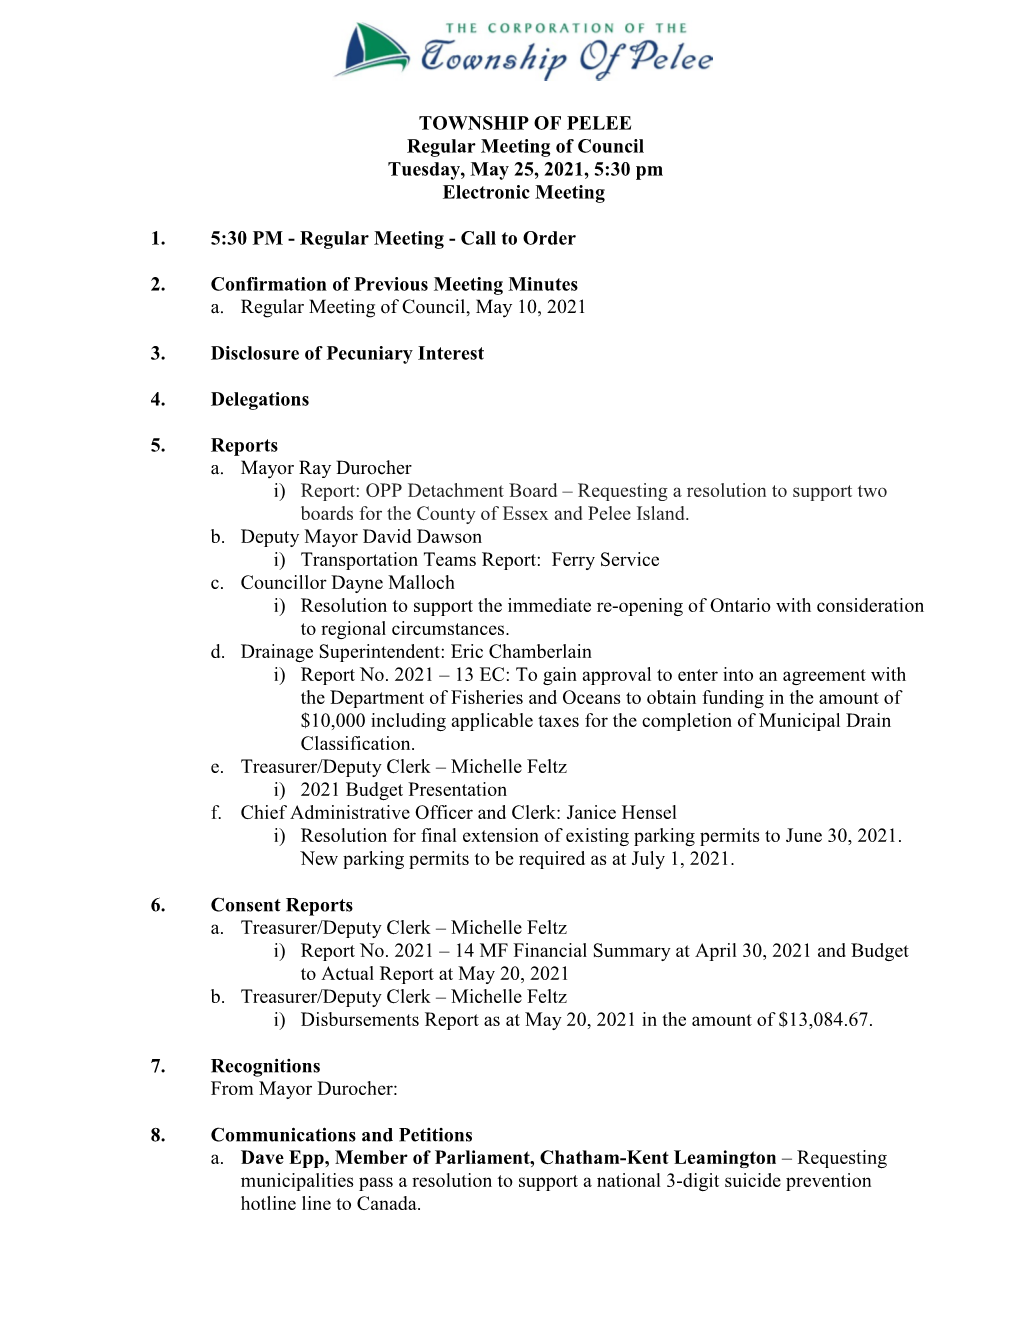 Regular Meeting of Council Tuesday, May 25, 2021, 5:30 Pm Electronic Meeting